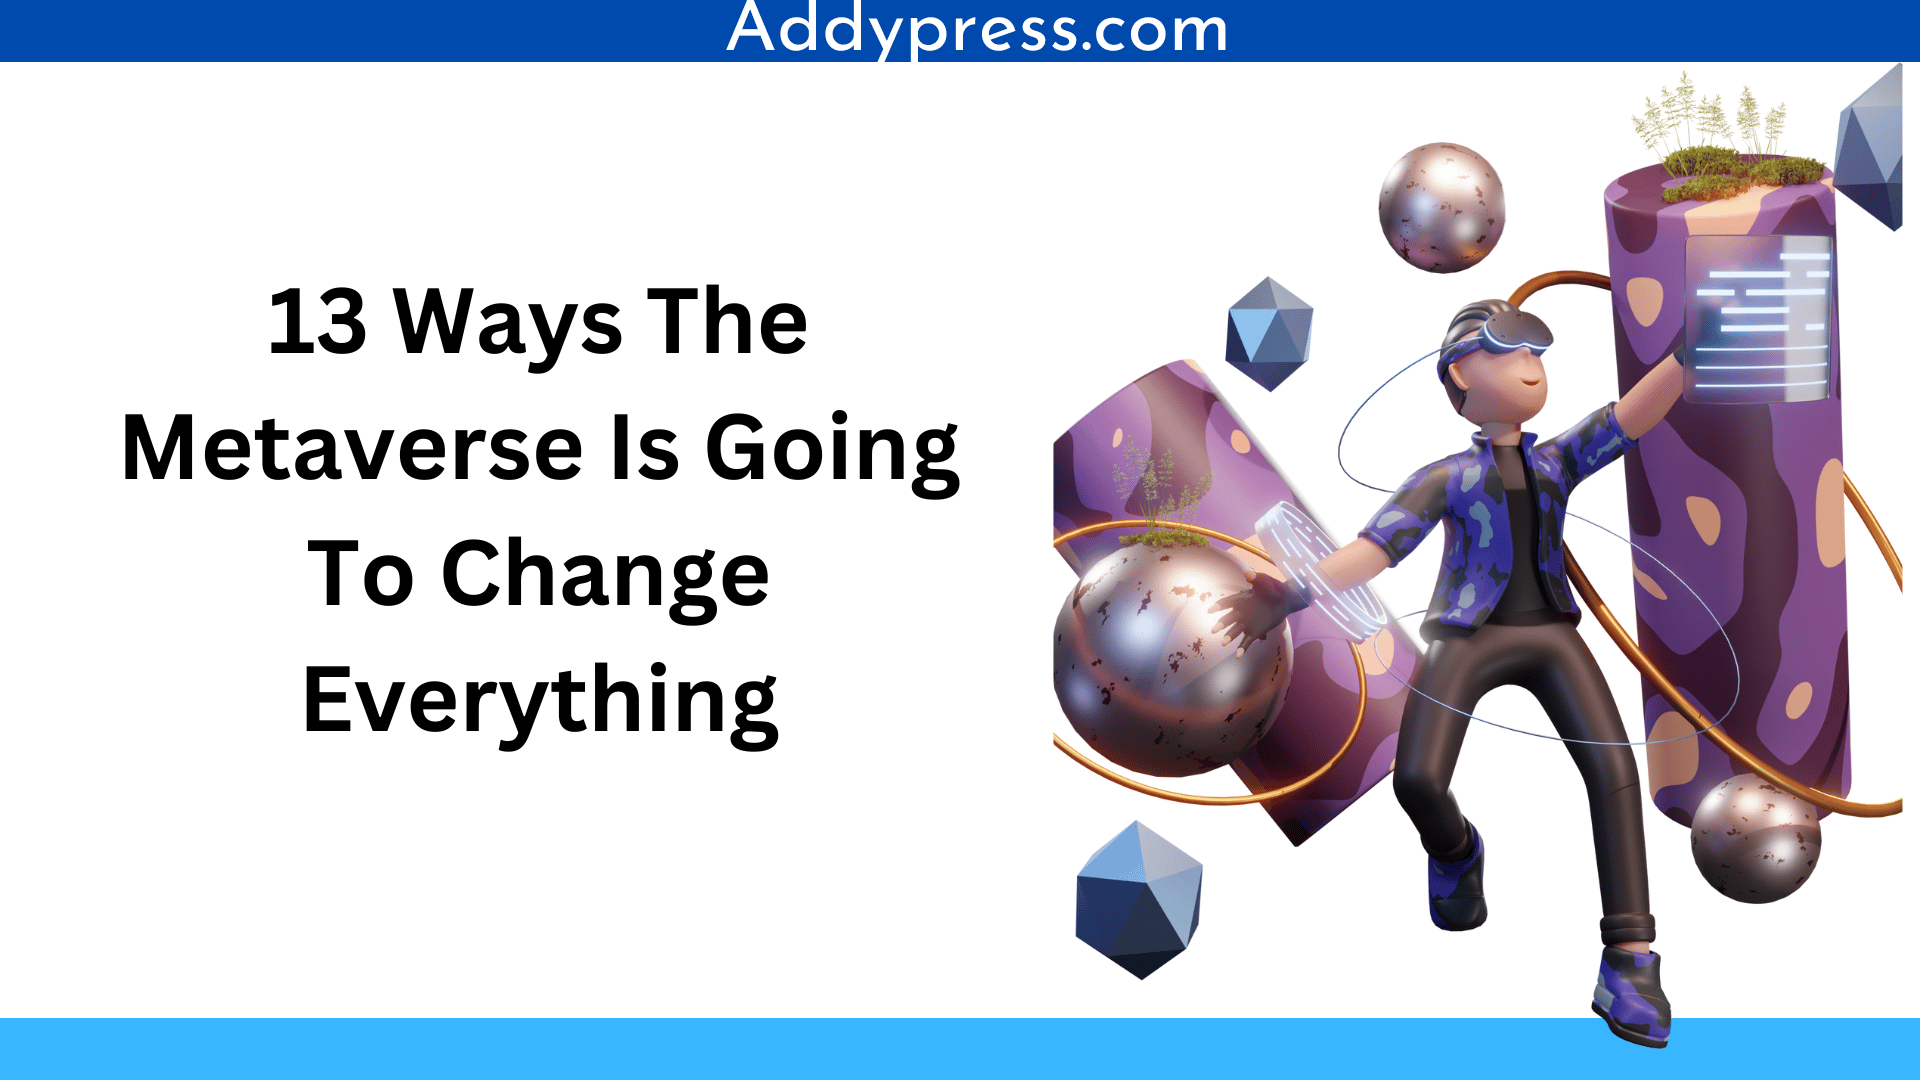 15 Ways The Metaverse Is Going To Change Everything